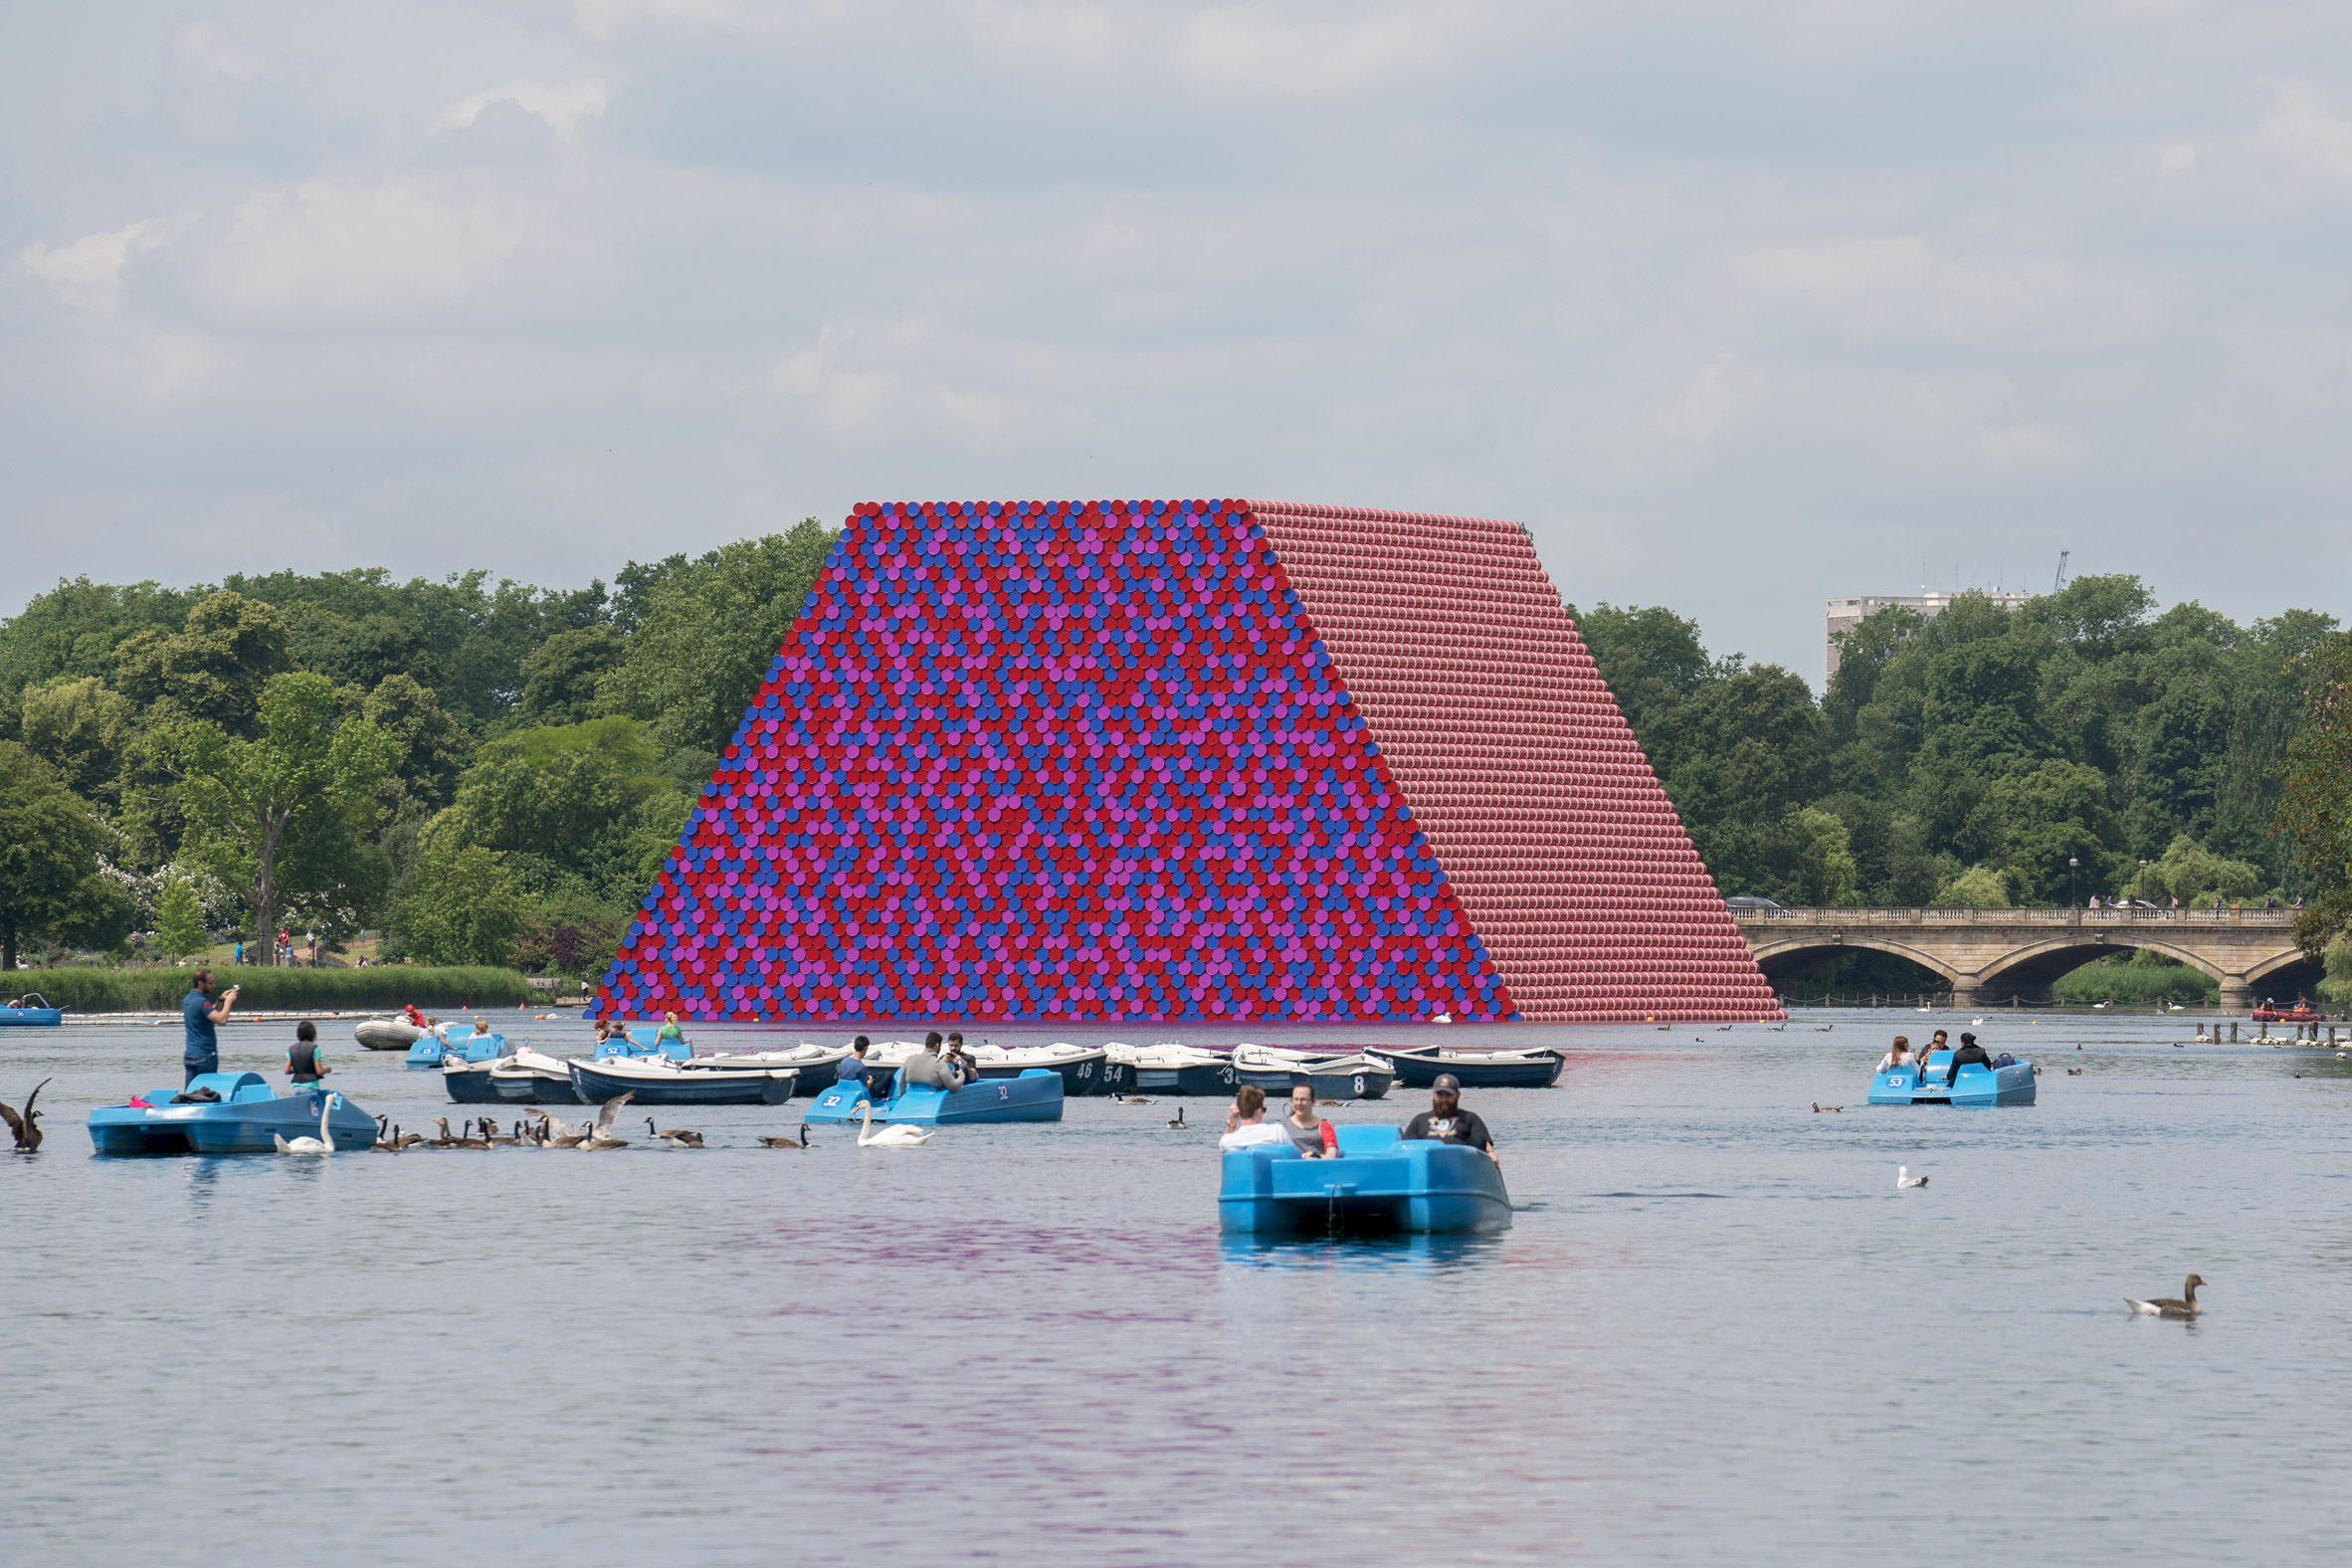 Christo unveils floating Serpentine sculpture made from 7,506 barrels